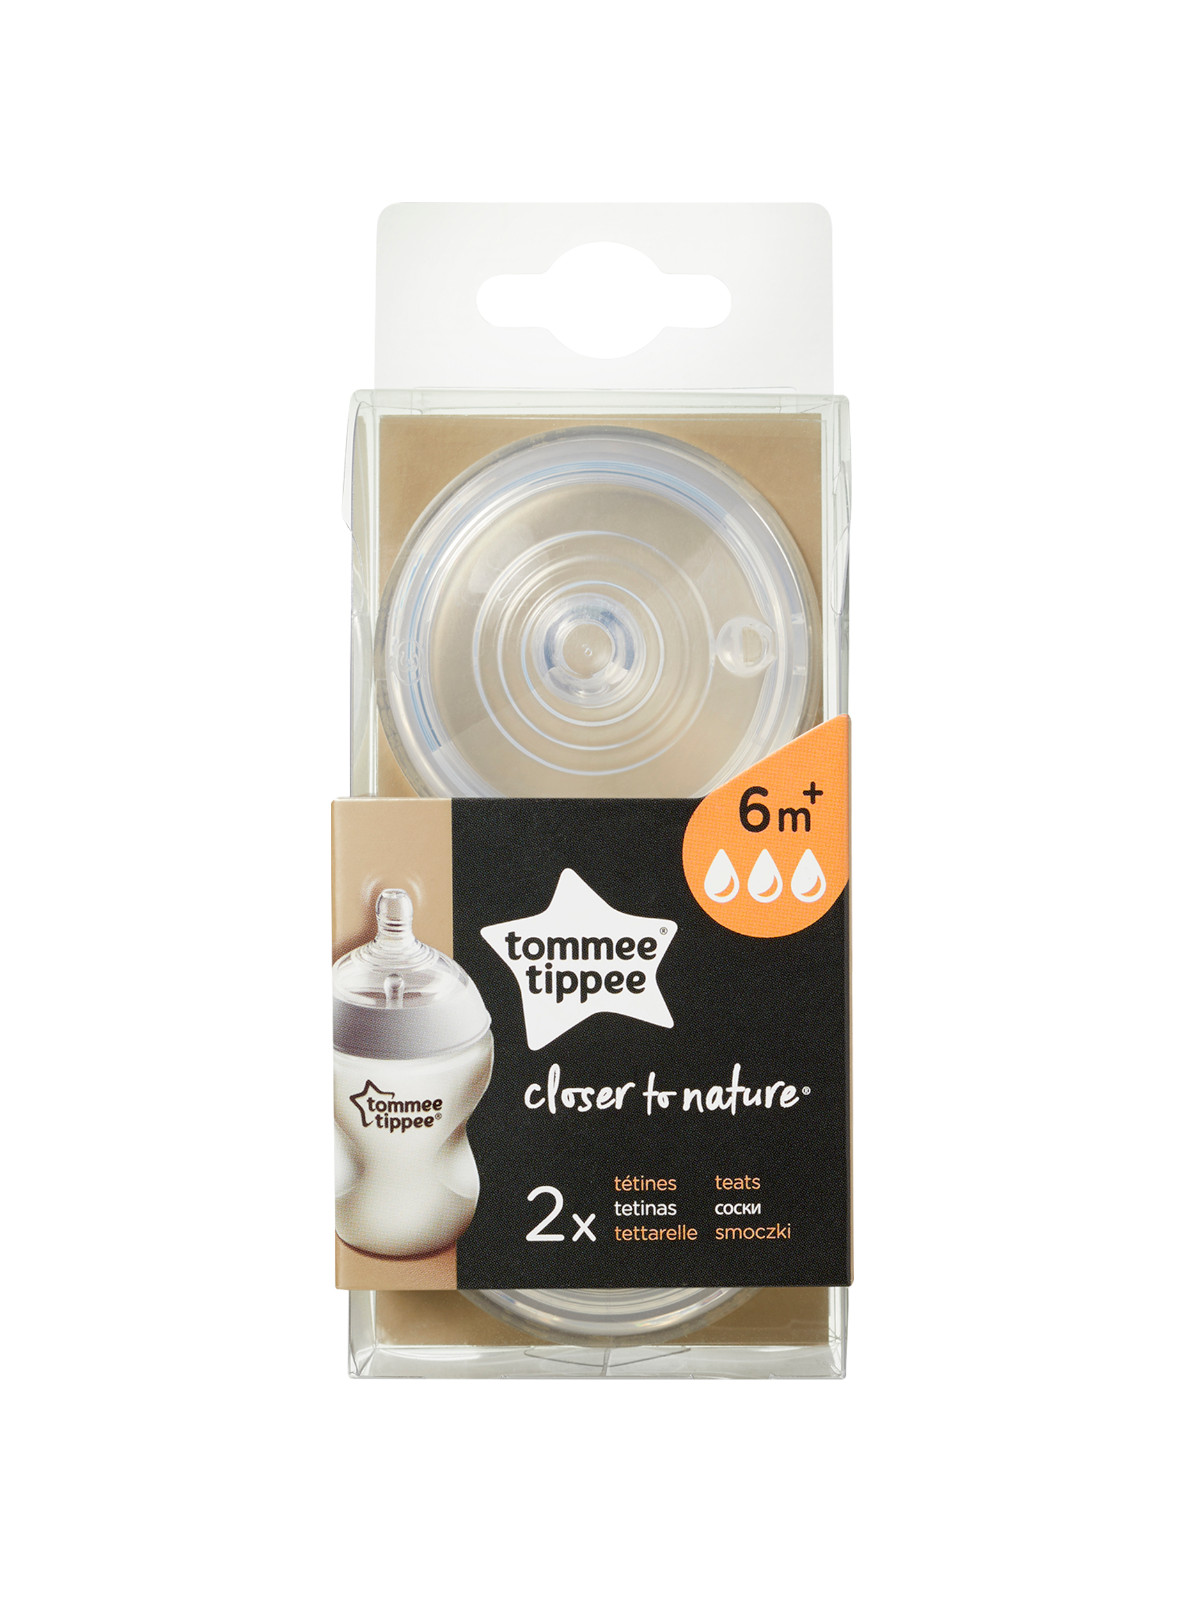 Tommee tippee tettarelle closer to nature, flusso veloce, 2 pezzi - TOMMEE TIPPEE